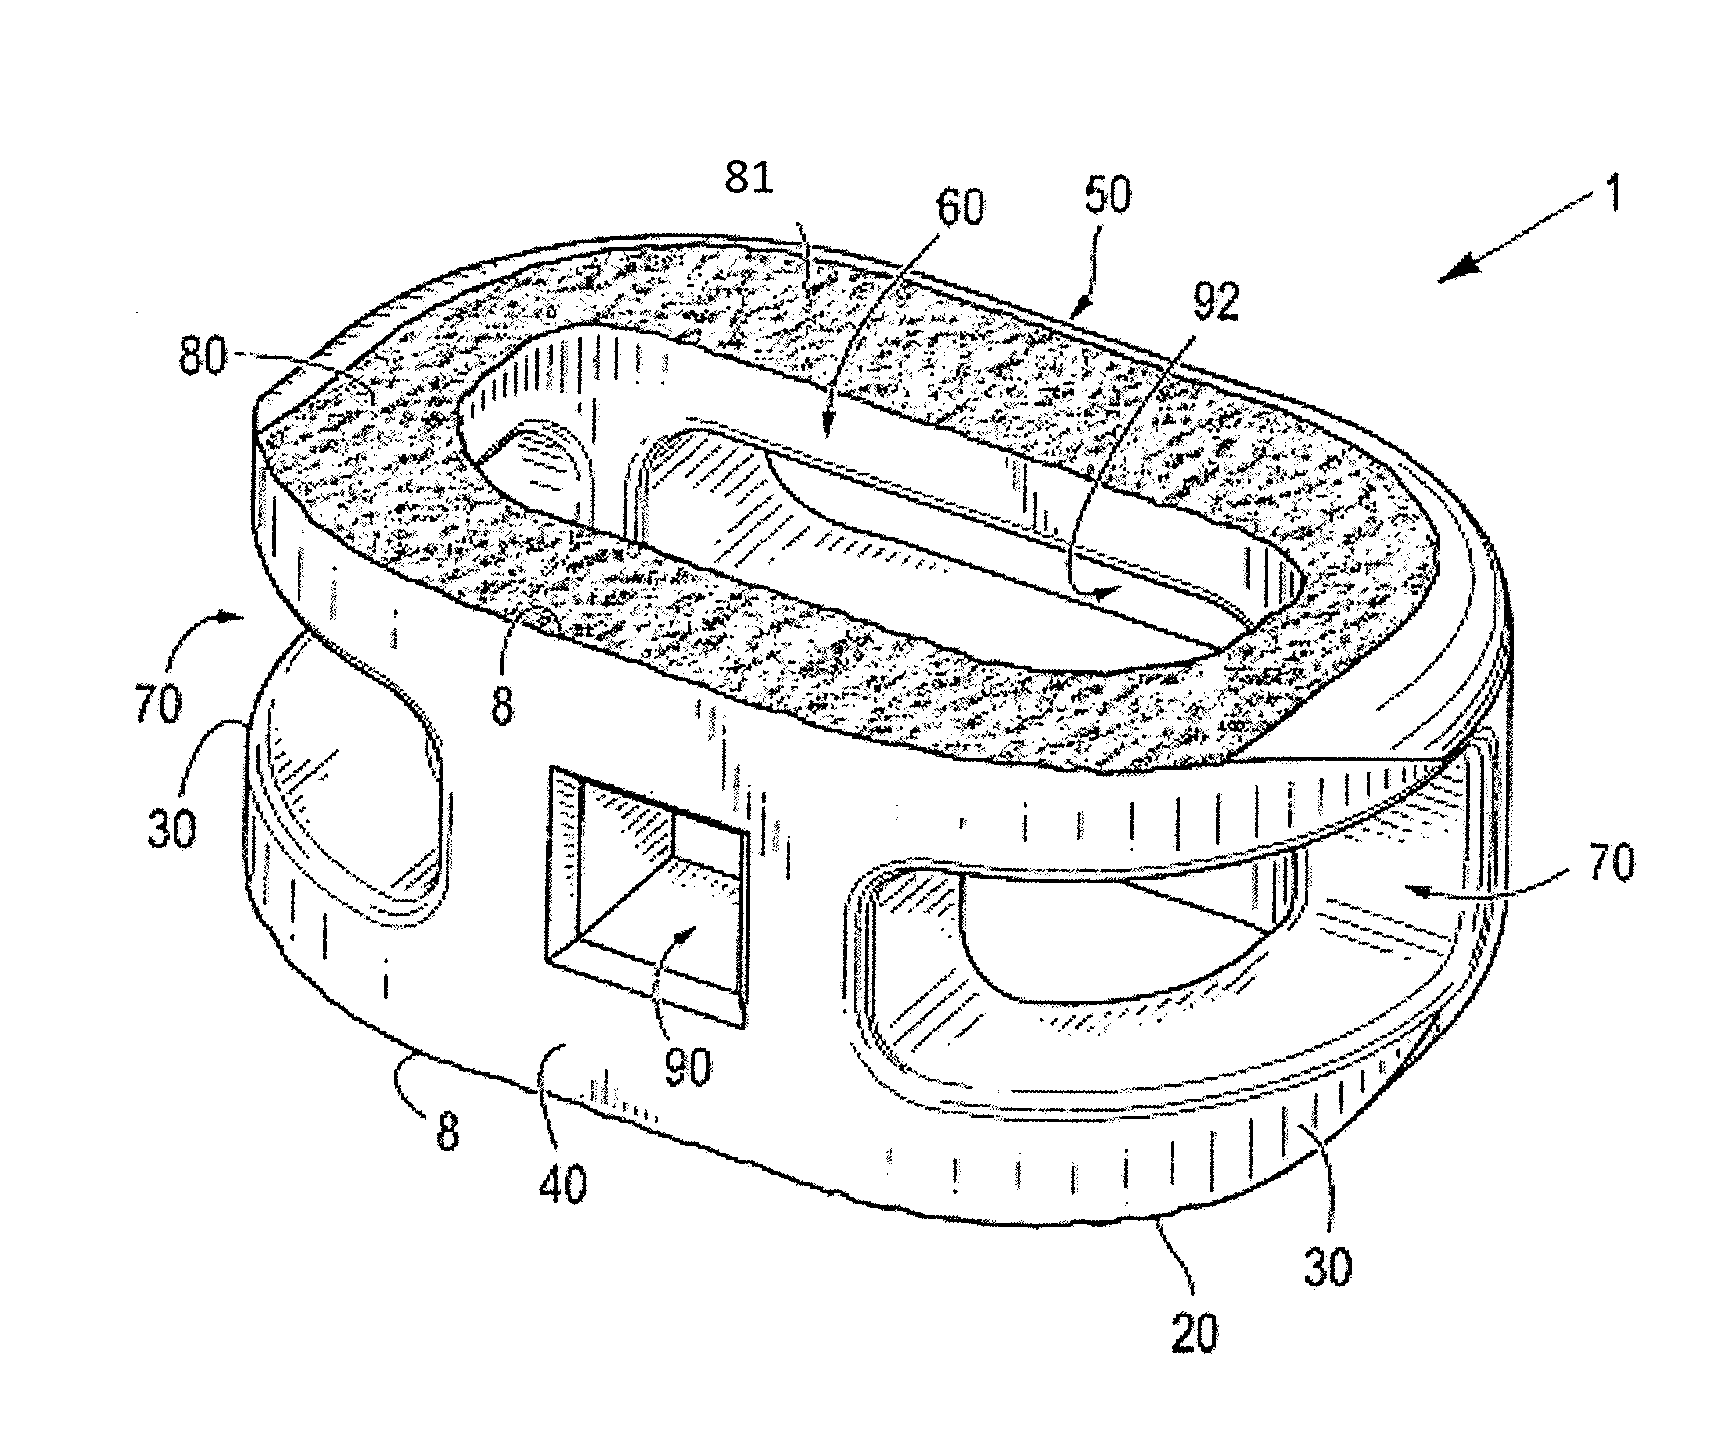 Process of fabricating composite implants having integration surfaces composed of a regular repeating pattern